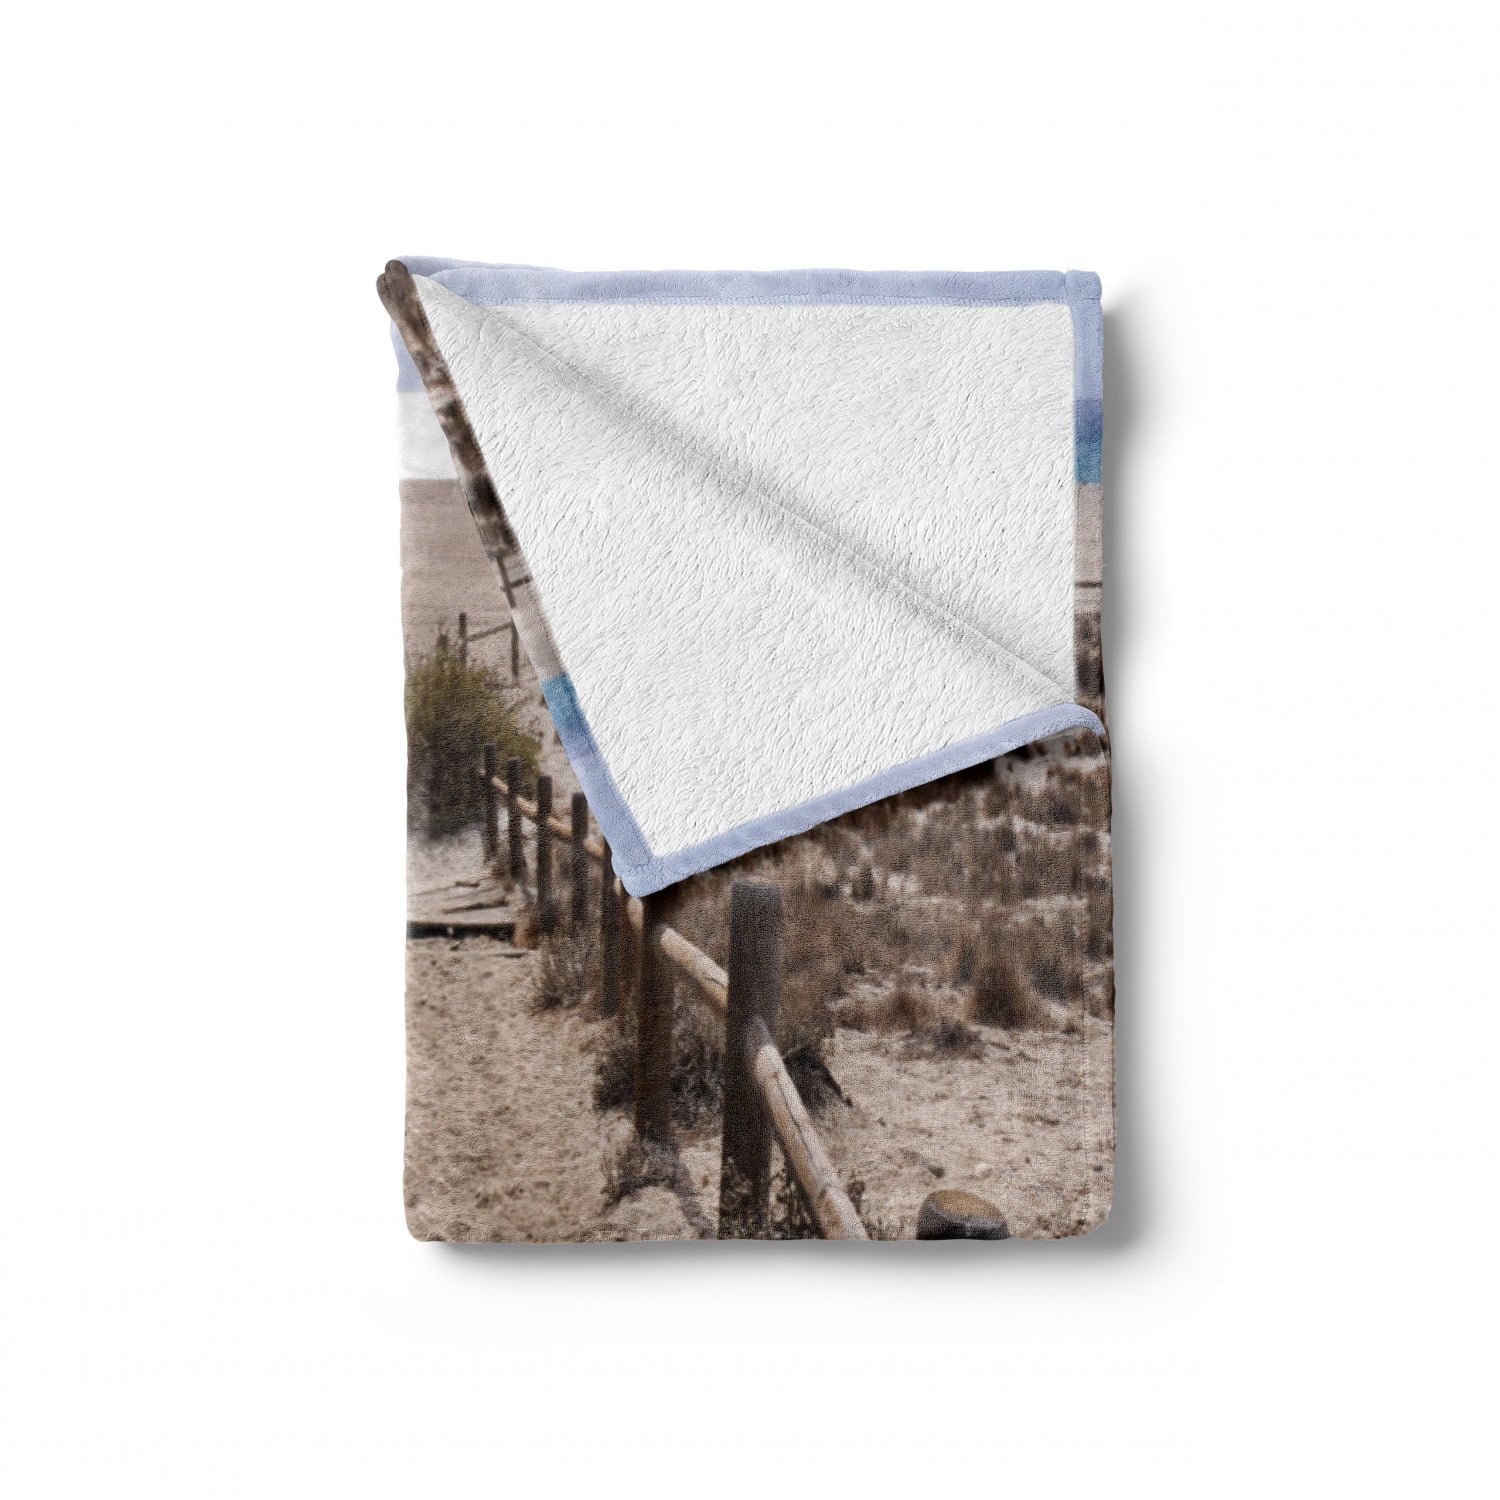 Flannel Fleece Accent Piece Soft Couch Cover for Adults Blue Beige 50 x 70 Ambesonne Beach Throw Blanket San Miguel Beach Near Gate Cape Atlantic Ocean Coast Serene Holiday Warm Relax Scene